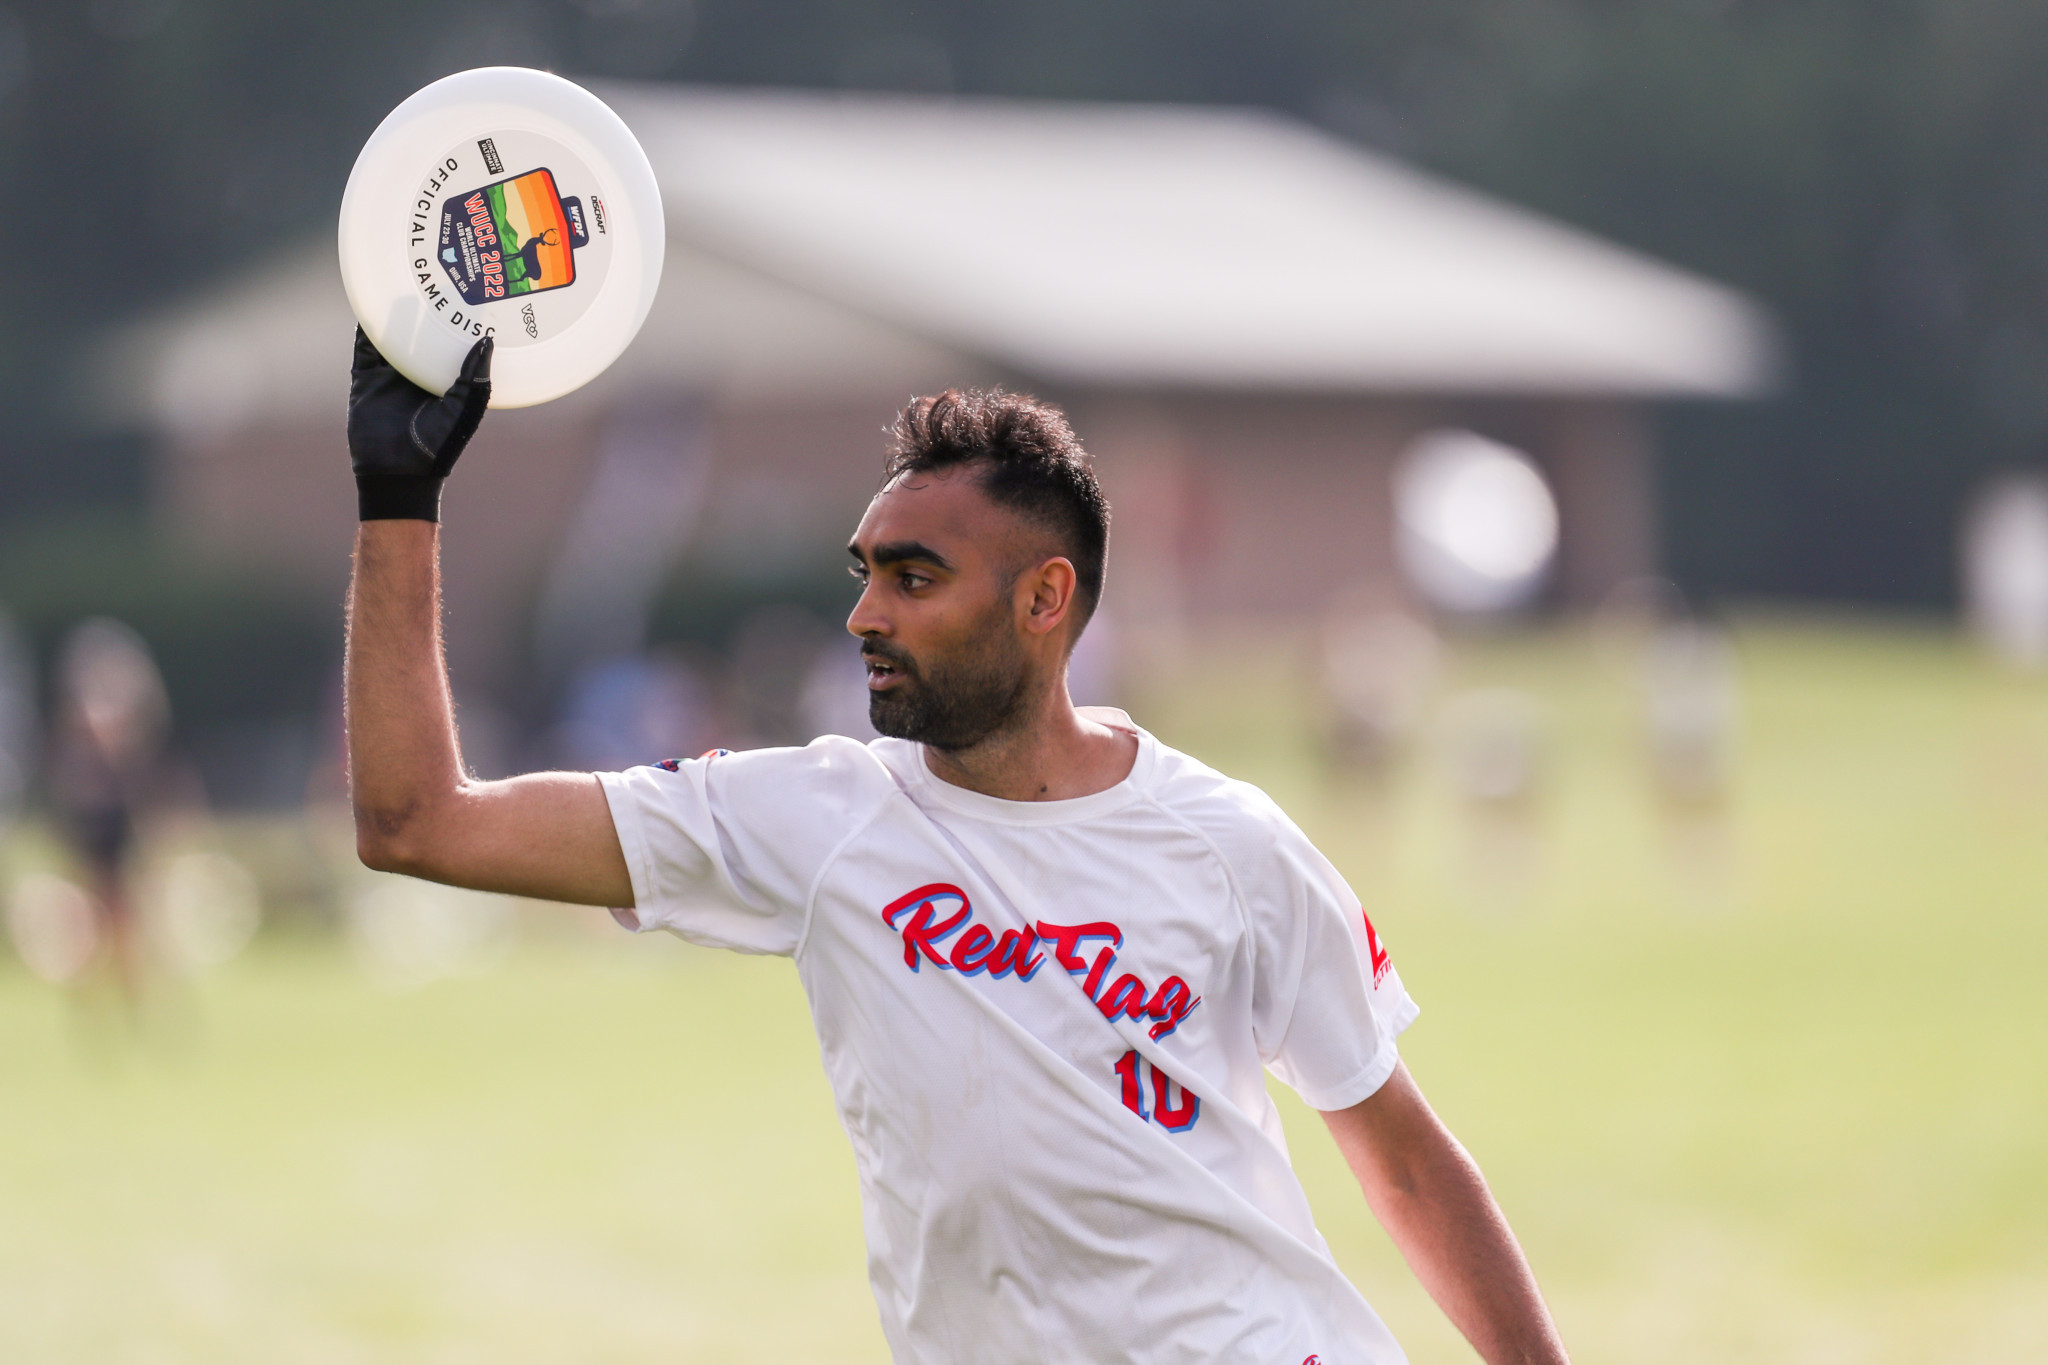 Gagandeep Chatha was Red Flag's hero as he scored the winner in their bout against NOISE ©Paul Rutherford for UltiPhotos